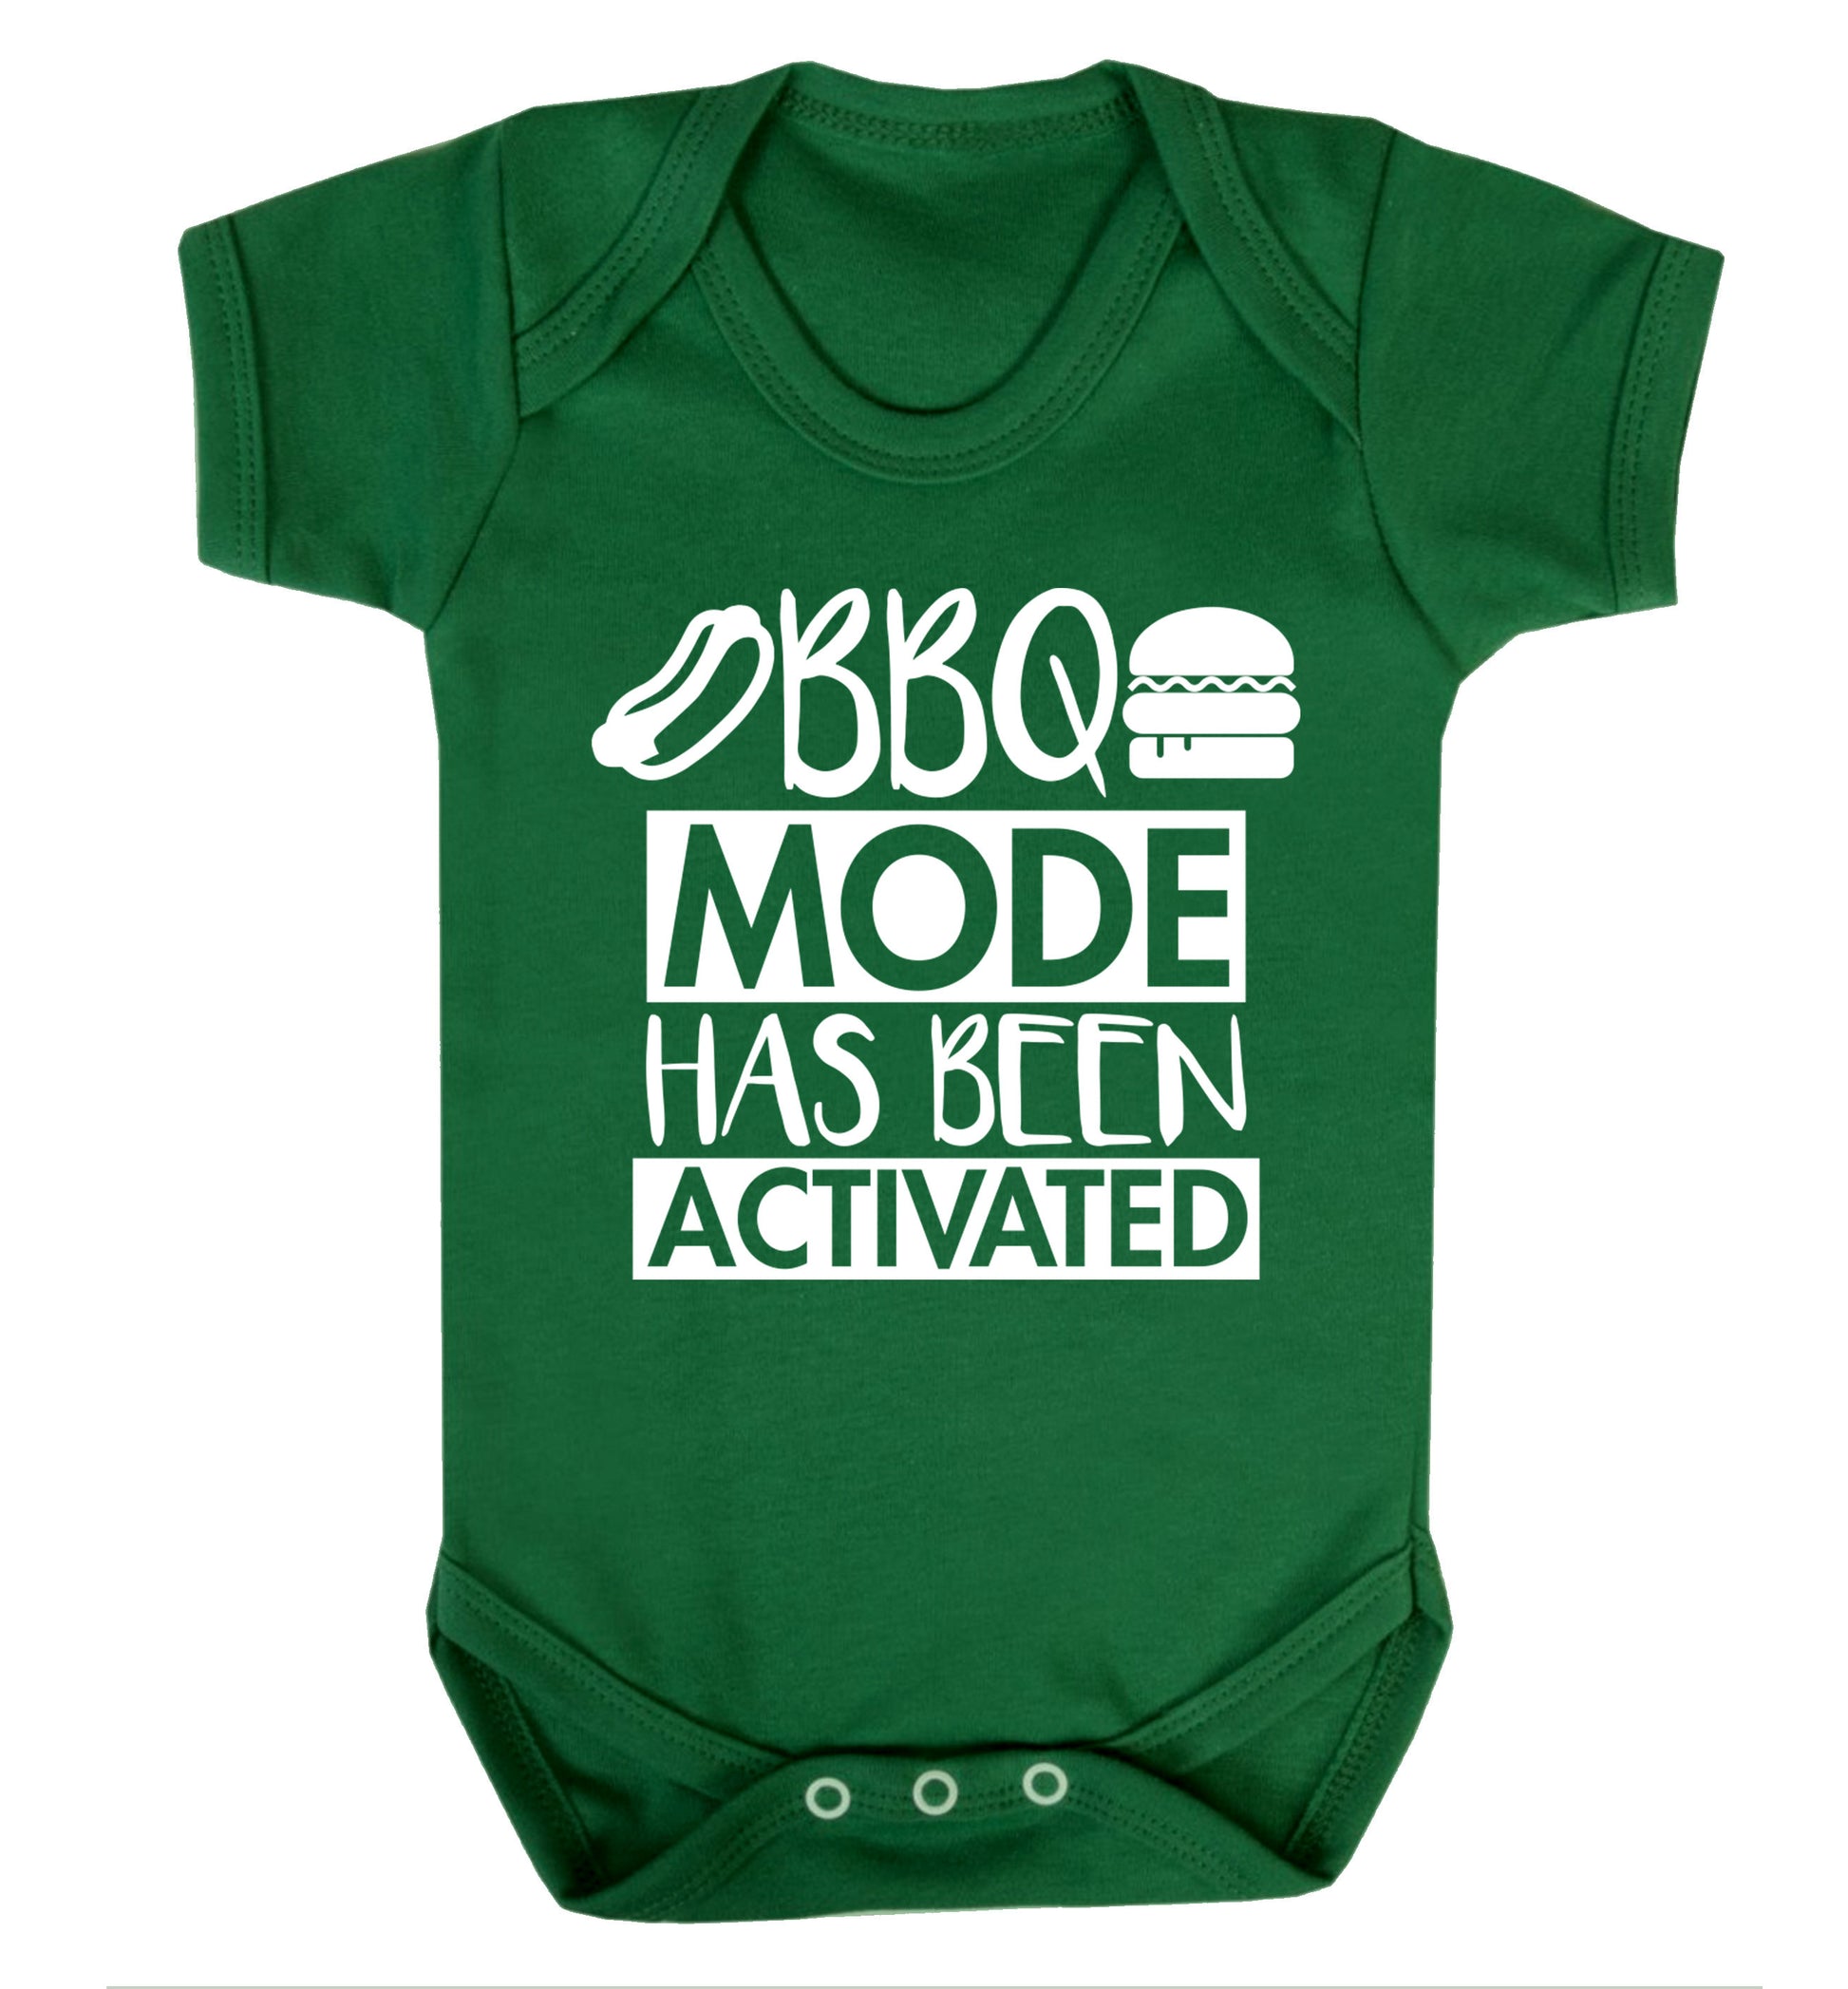 Bbq mode has been activated Baby Vest green 18-24 months